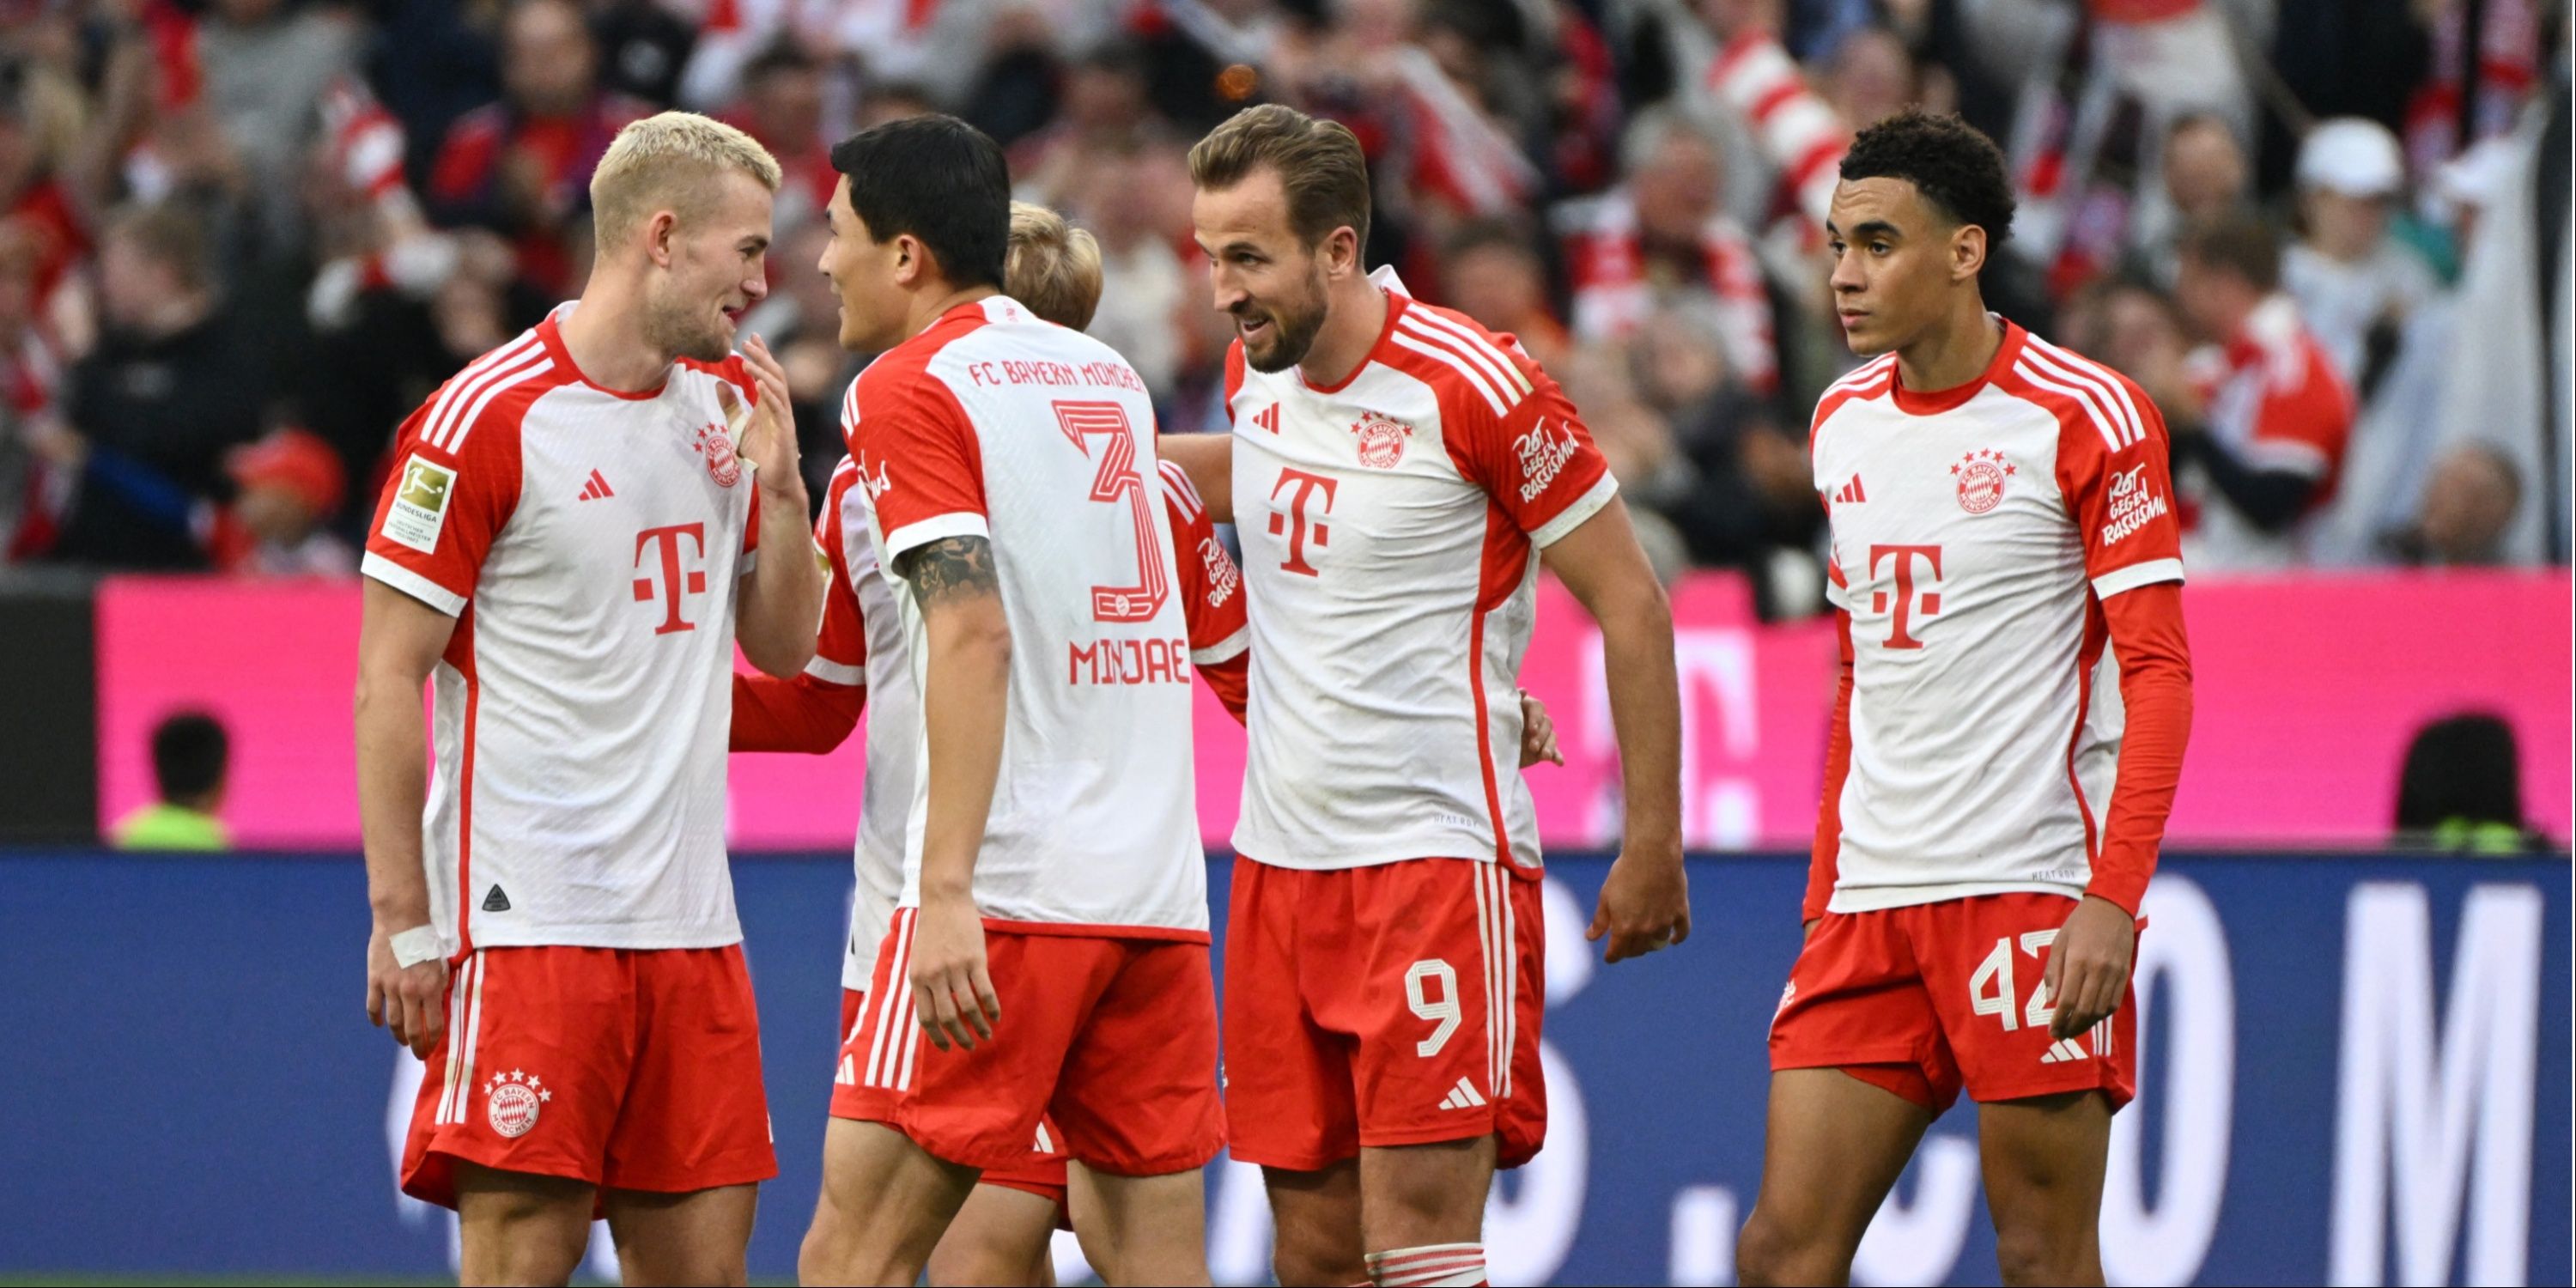 Harry Kane Shines as Bayern Munich Secures Crucial Victory